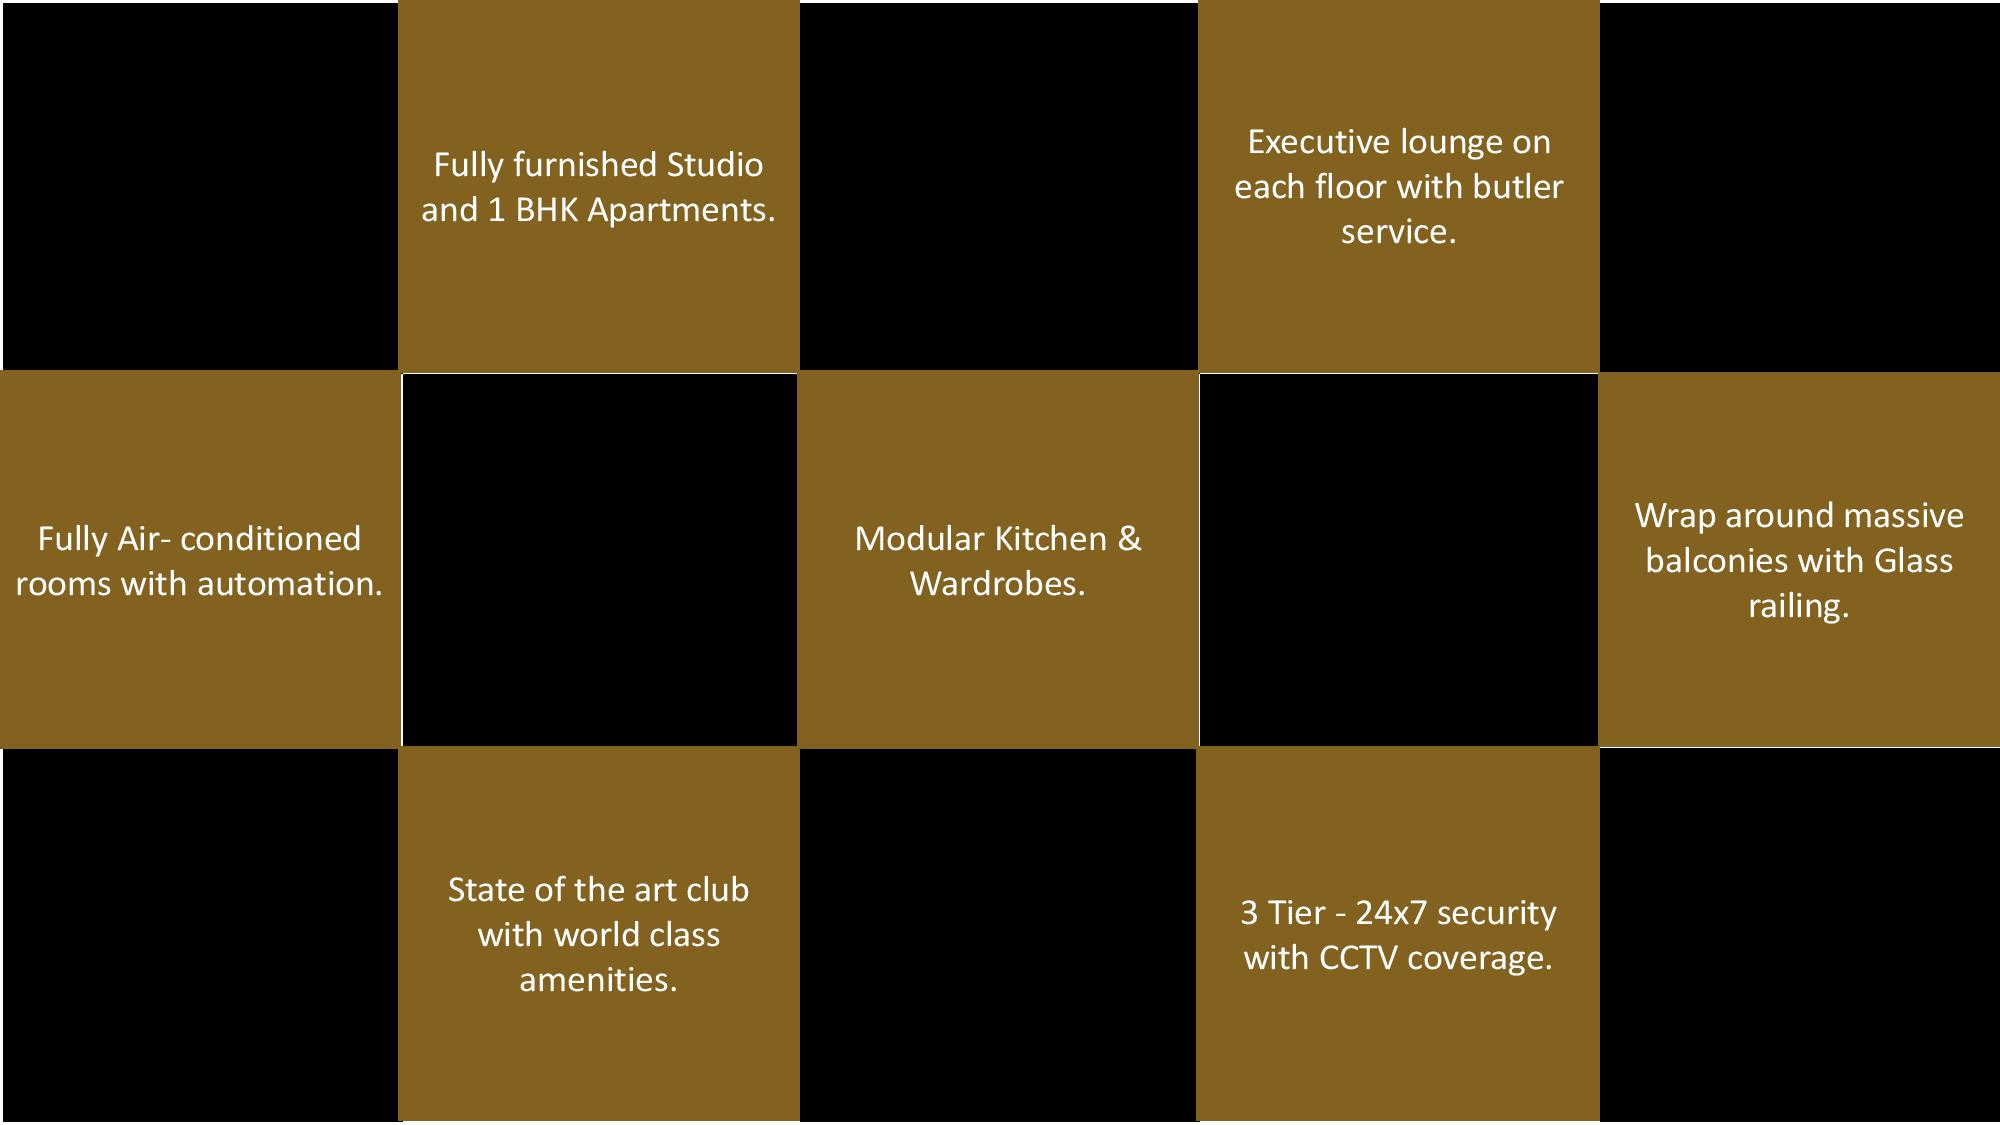 Fully furnished studio and 1 BHK apartments at Central Park Belvista, Gurgaon